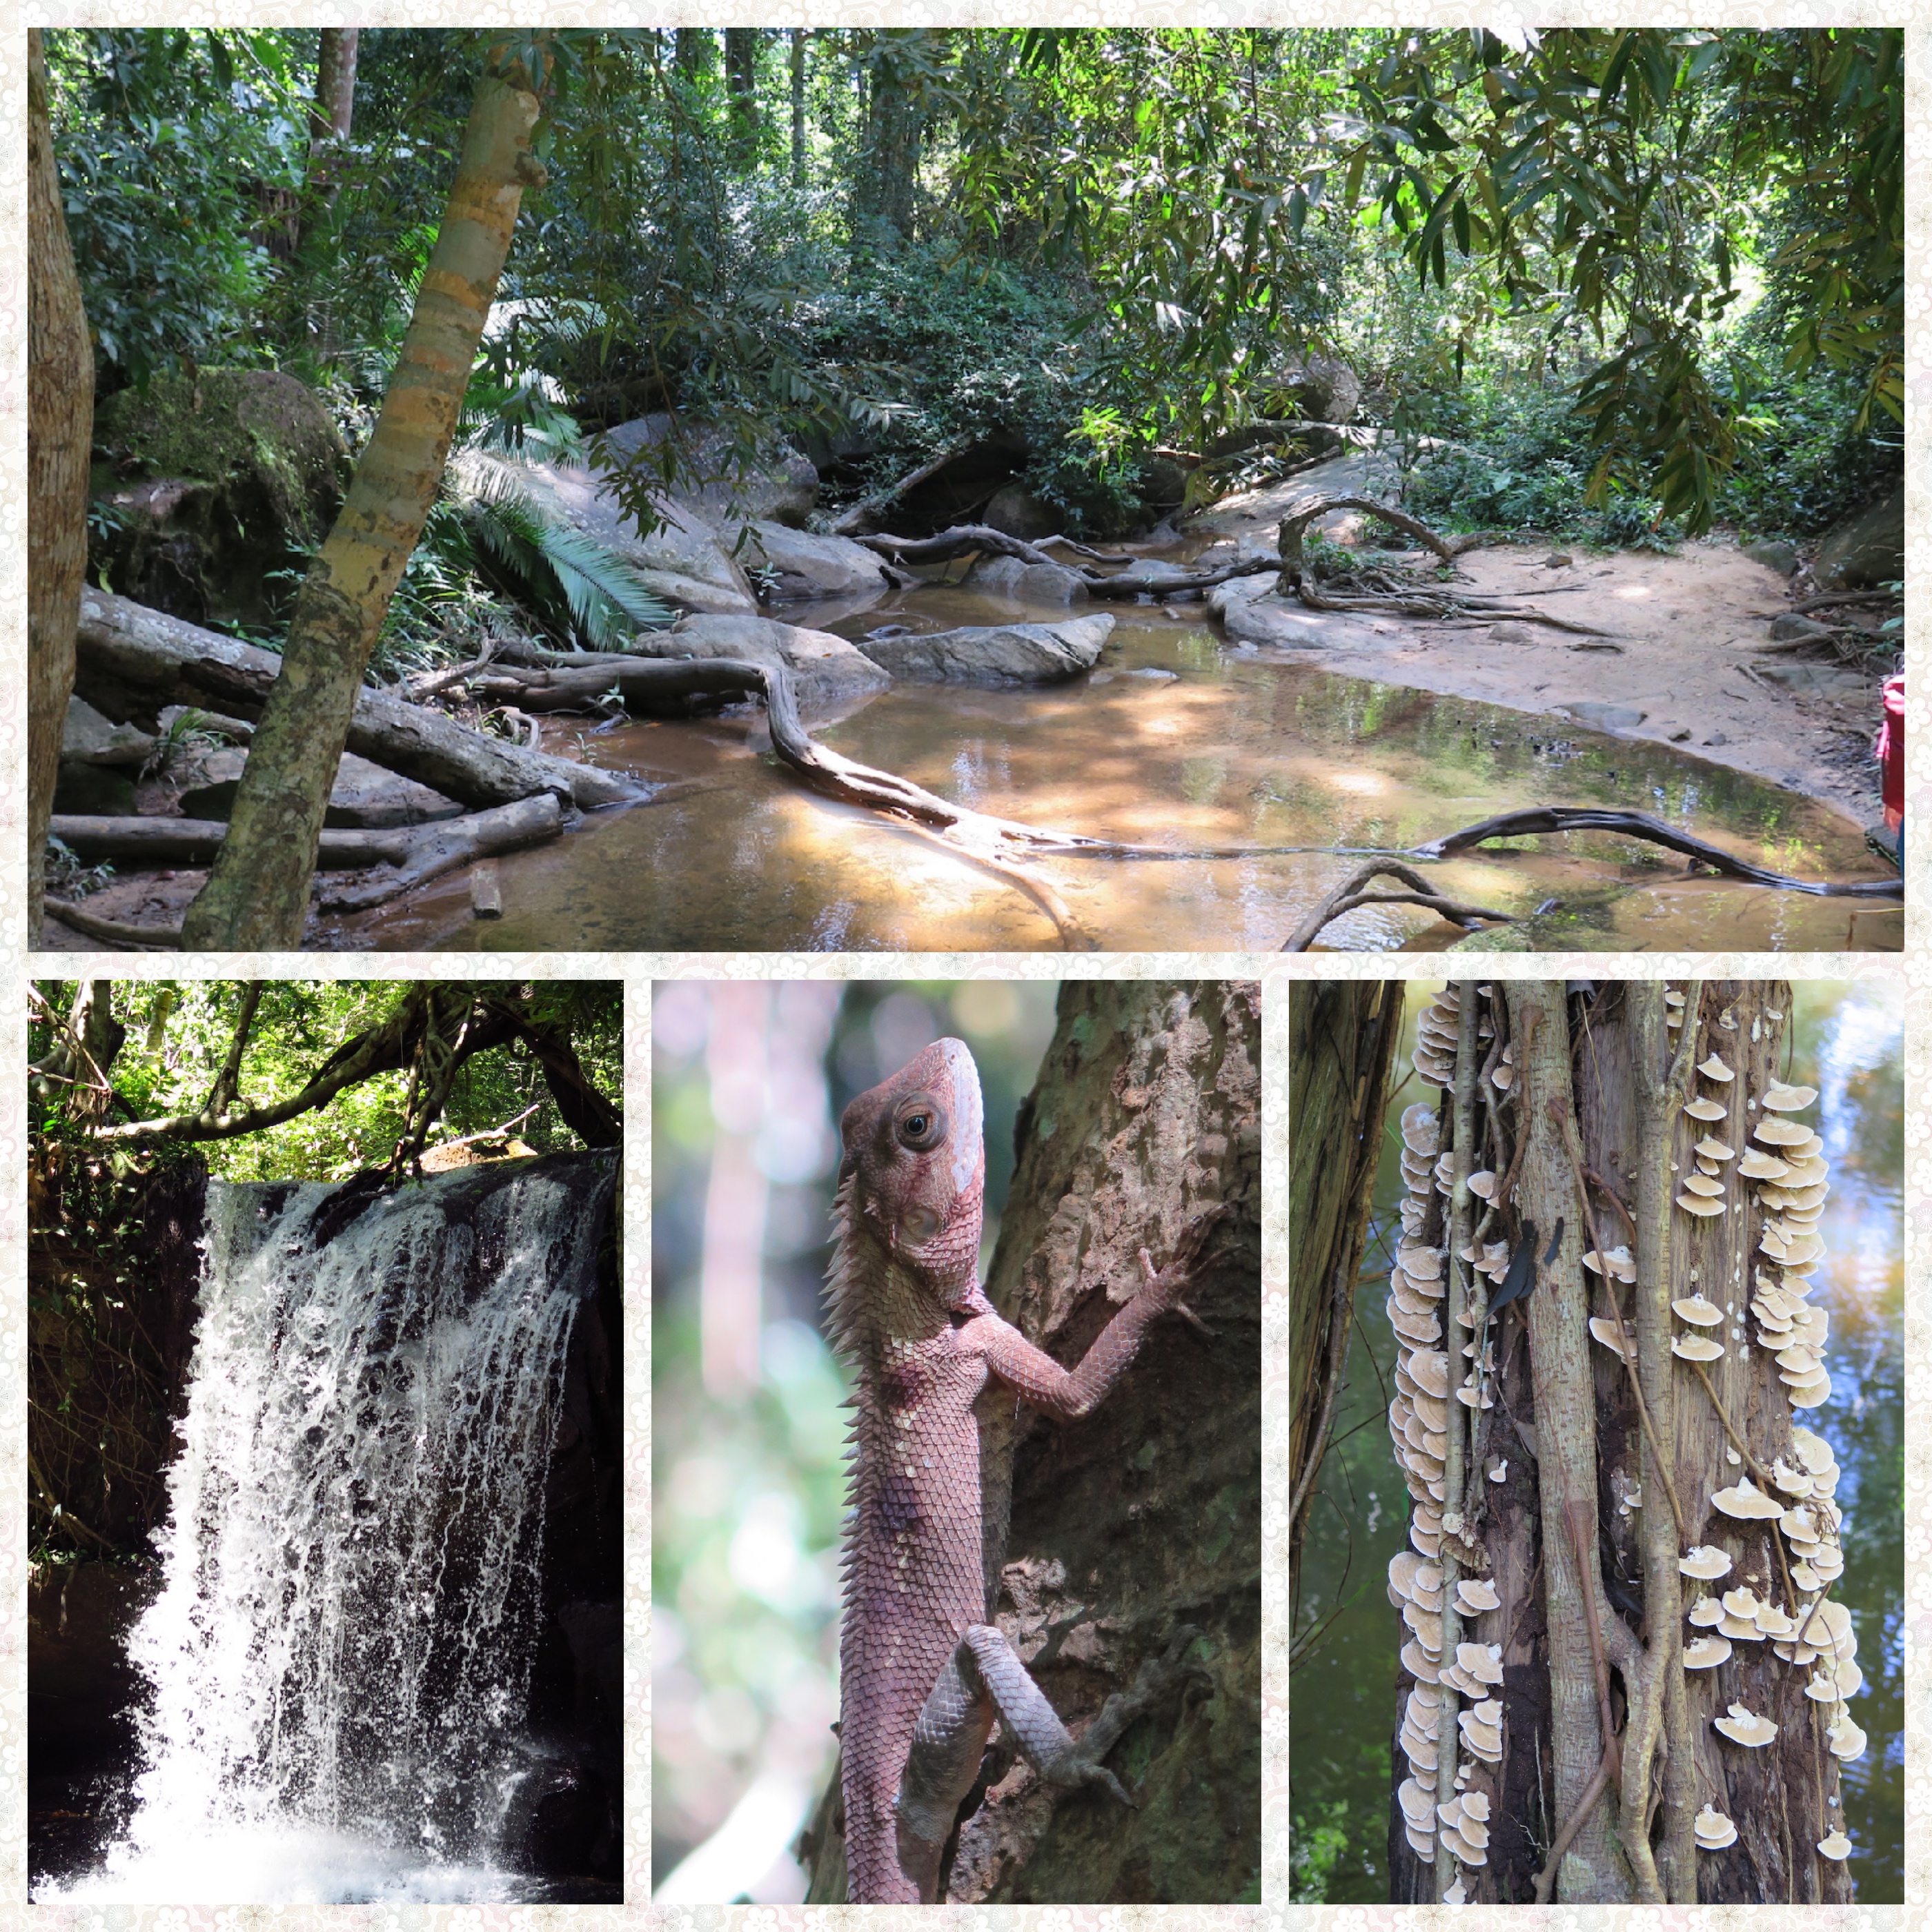 4 images of a rainforest stream, waterfall, a chamelon and tree mushrooms